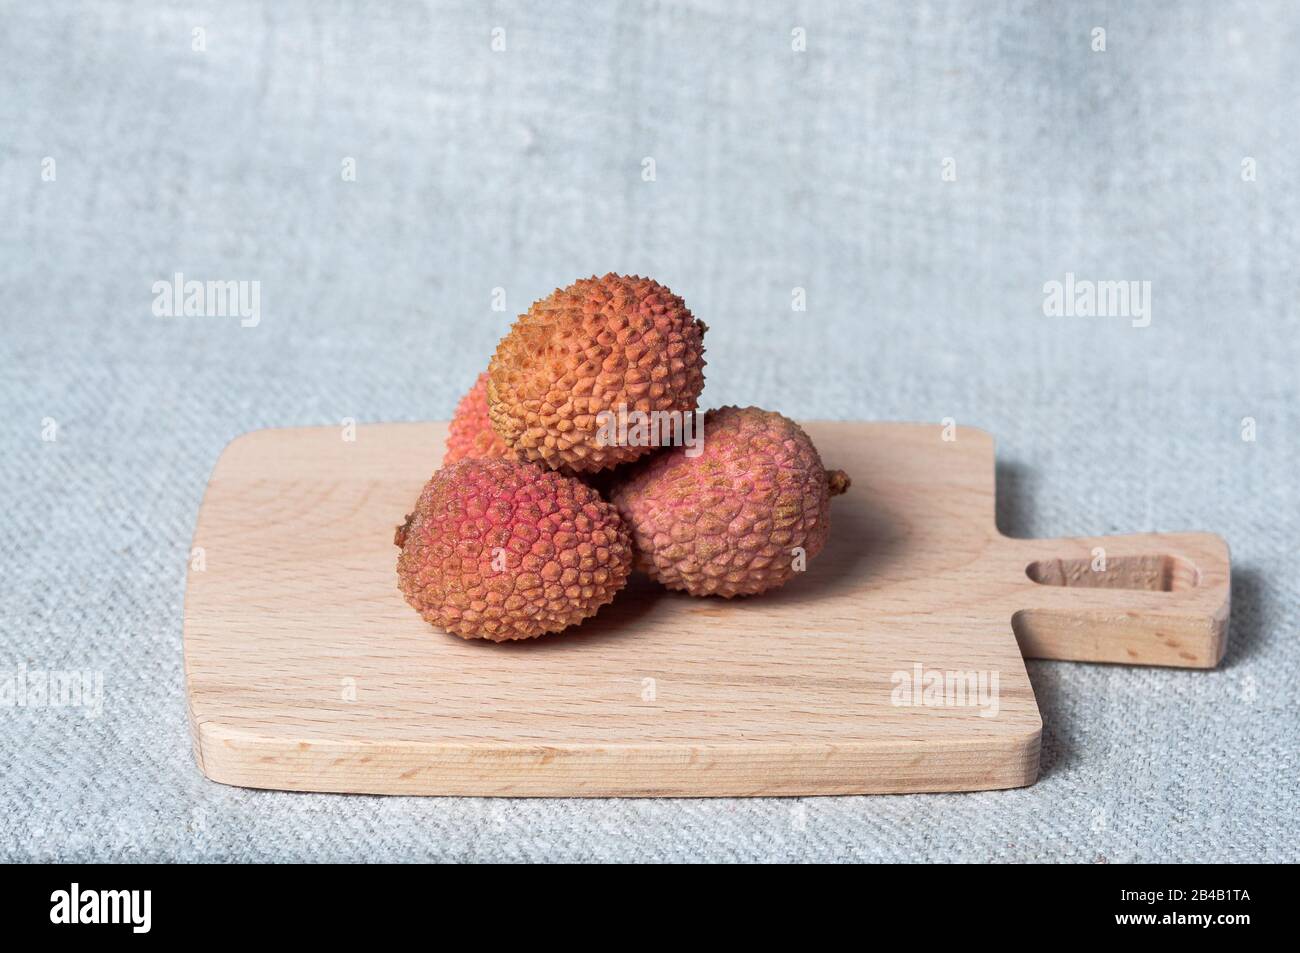 Close-up of fresh fruit lychee on wooden board Stock Photo